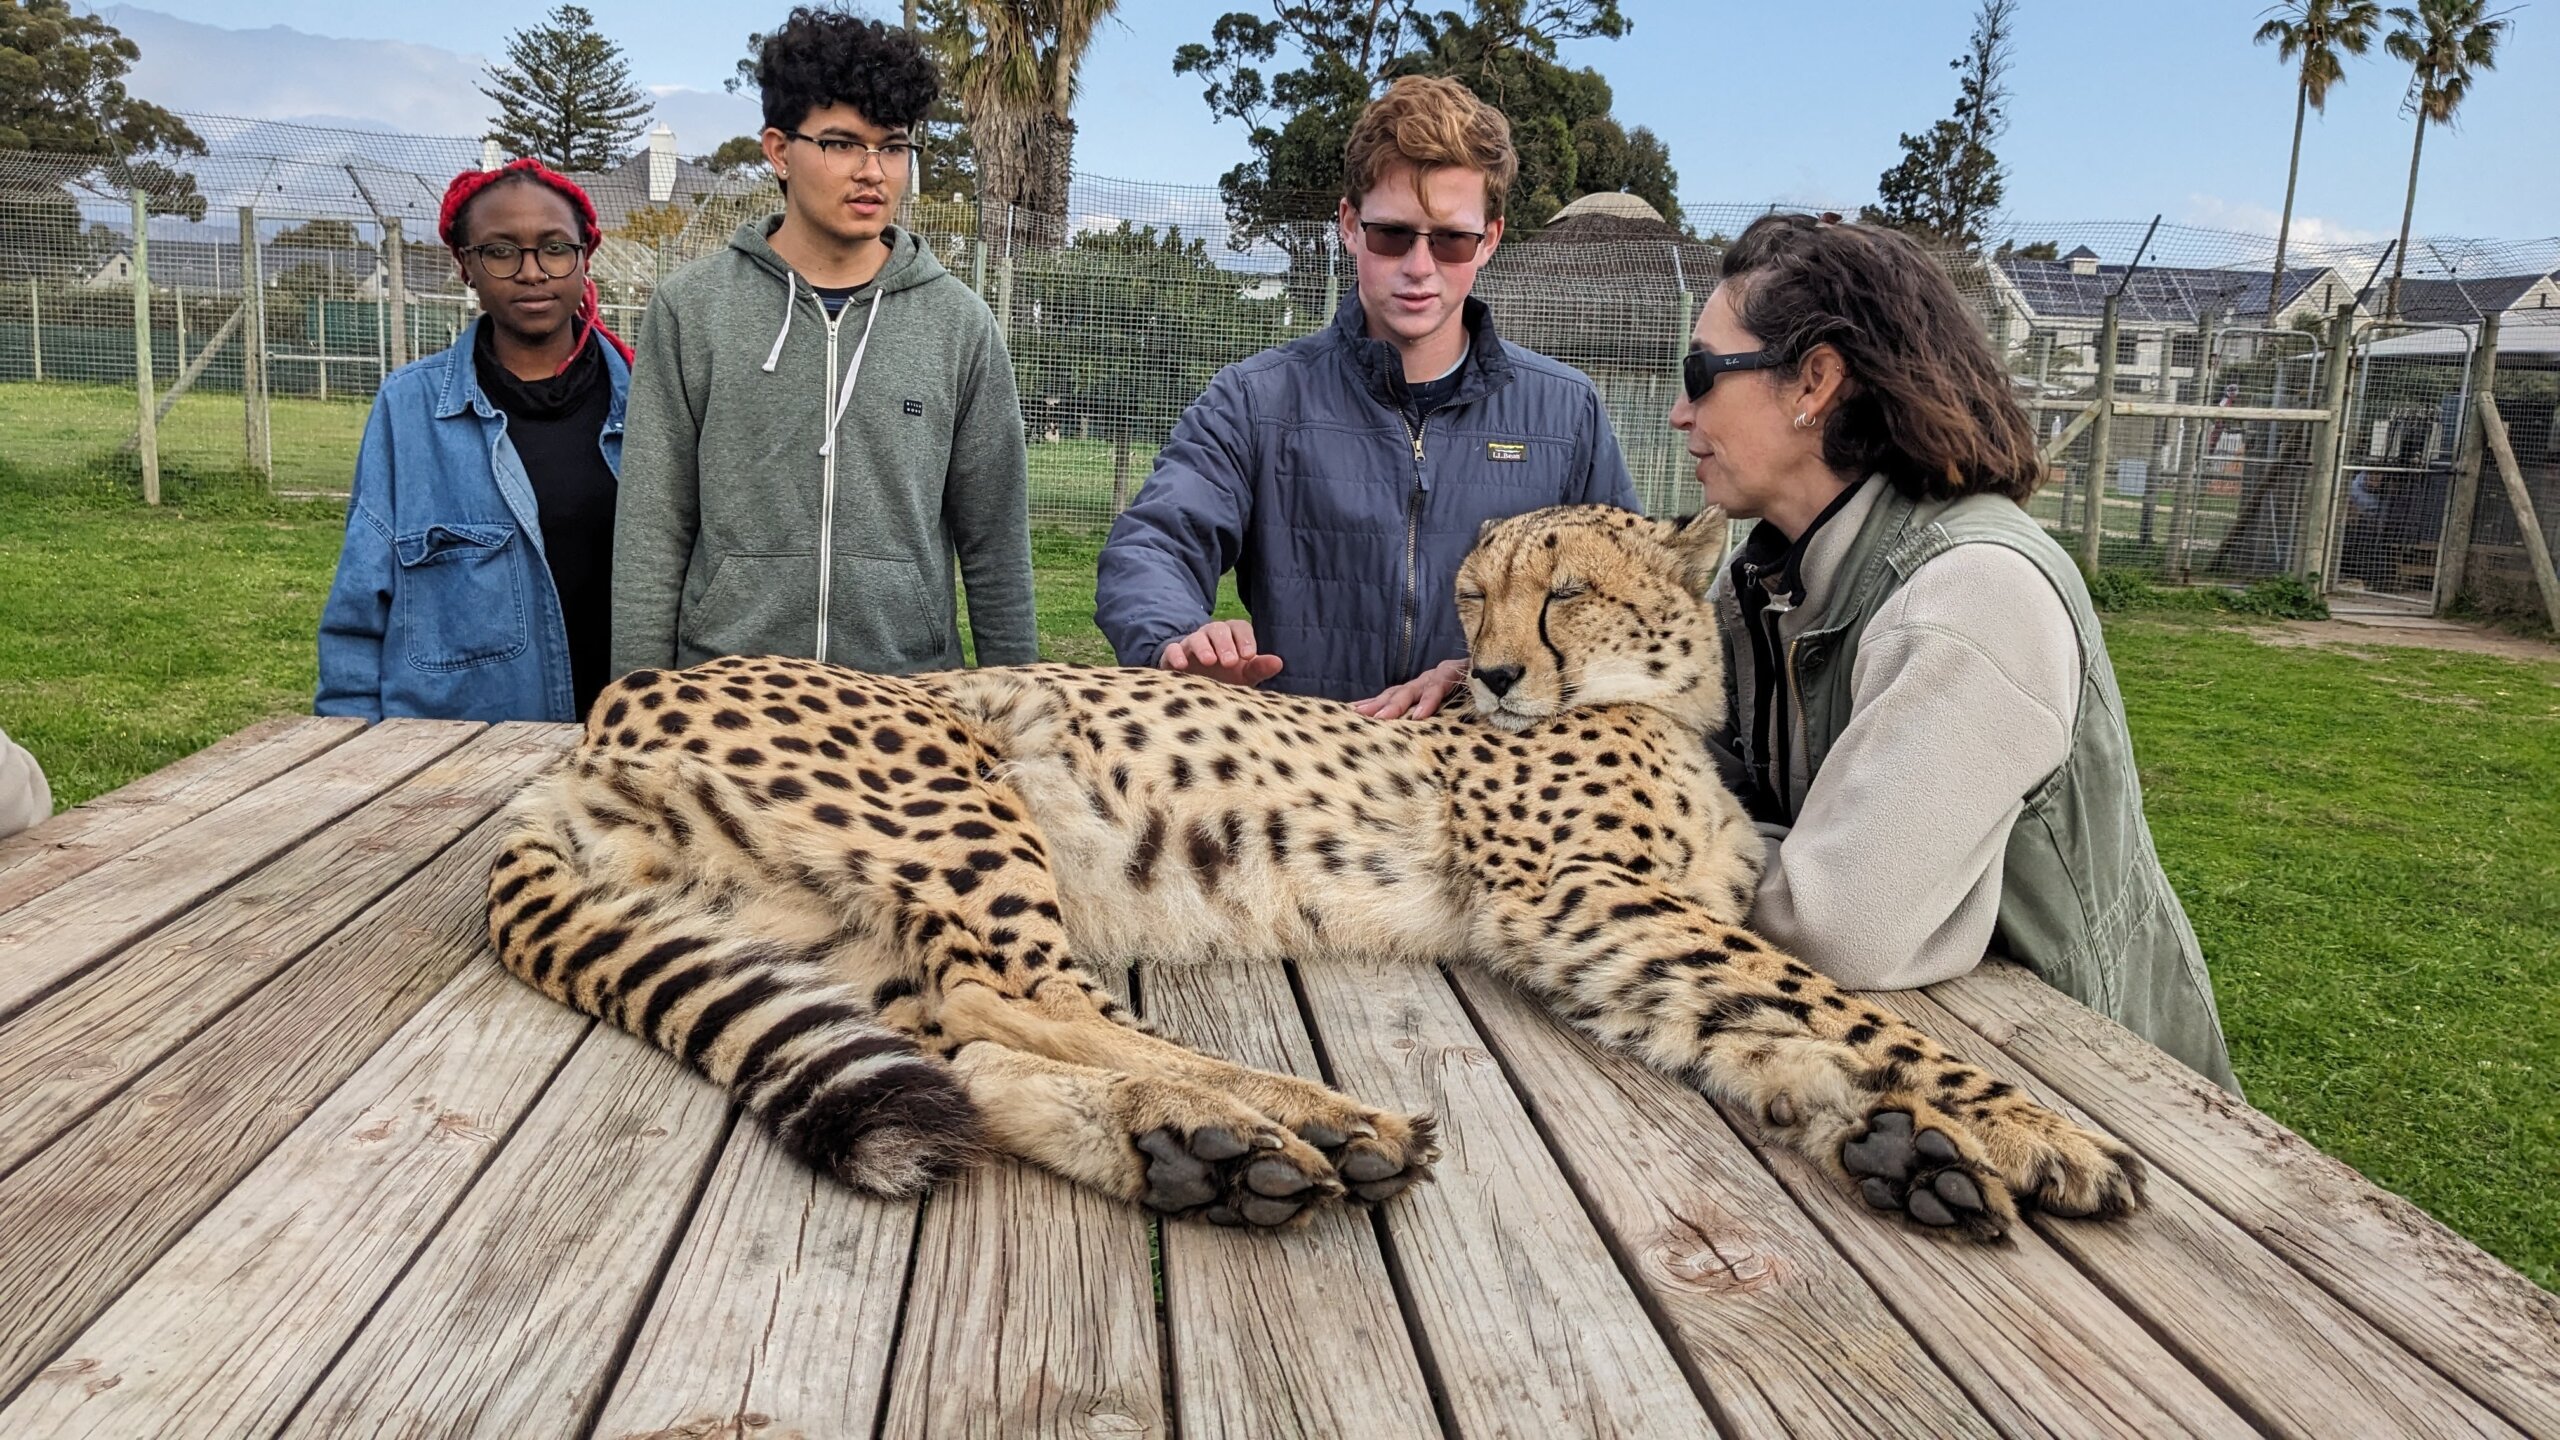 Group of students pet a cheetah in South Africa